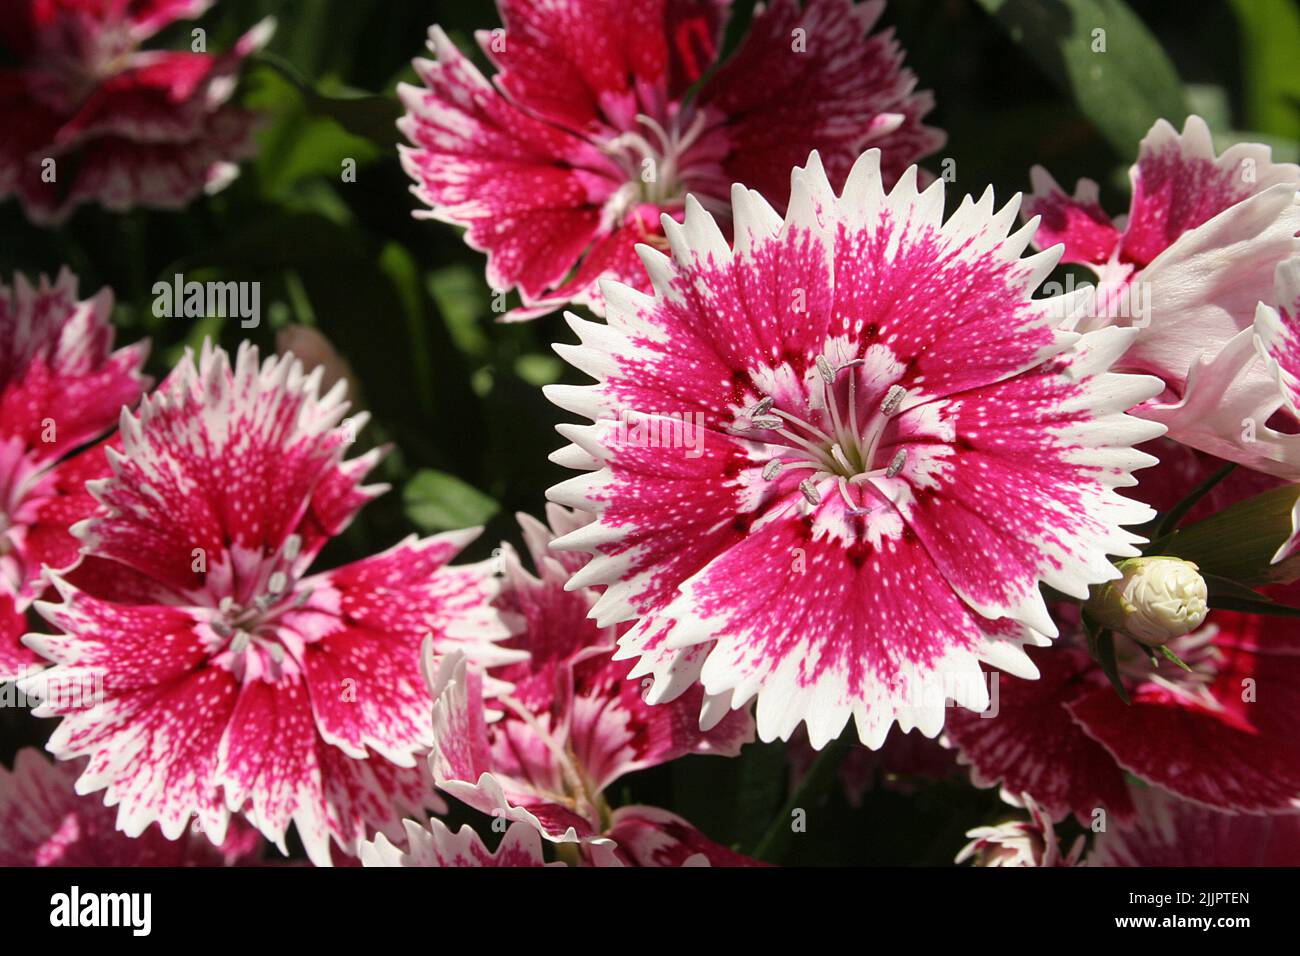 A vibrant sweet william flowers blooming in the garden during a sunny day Stock Photo